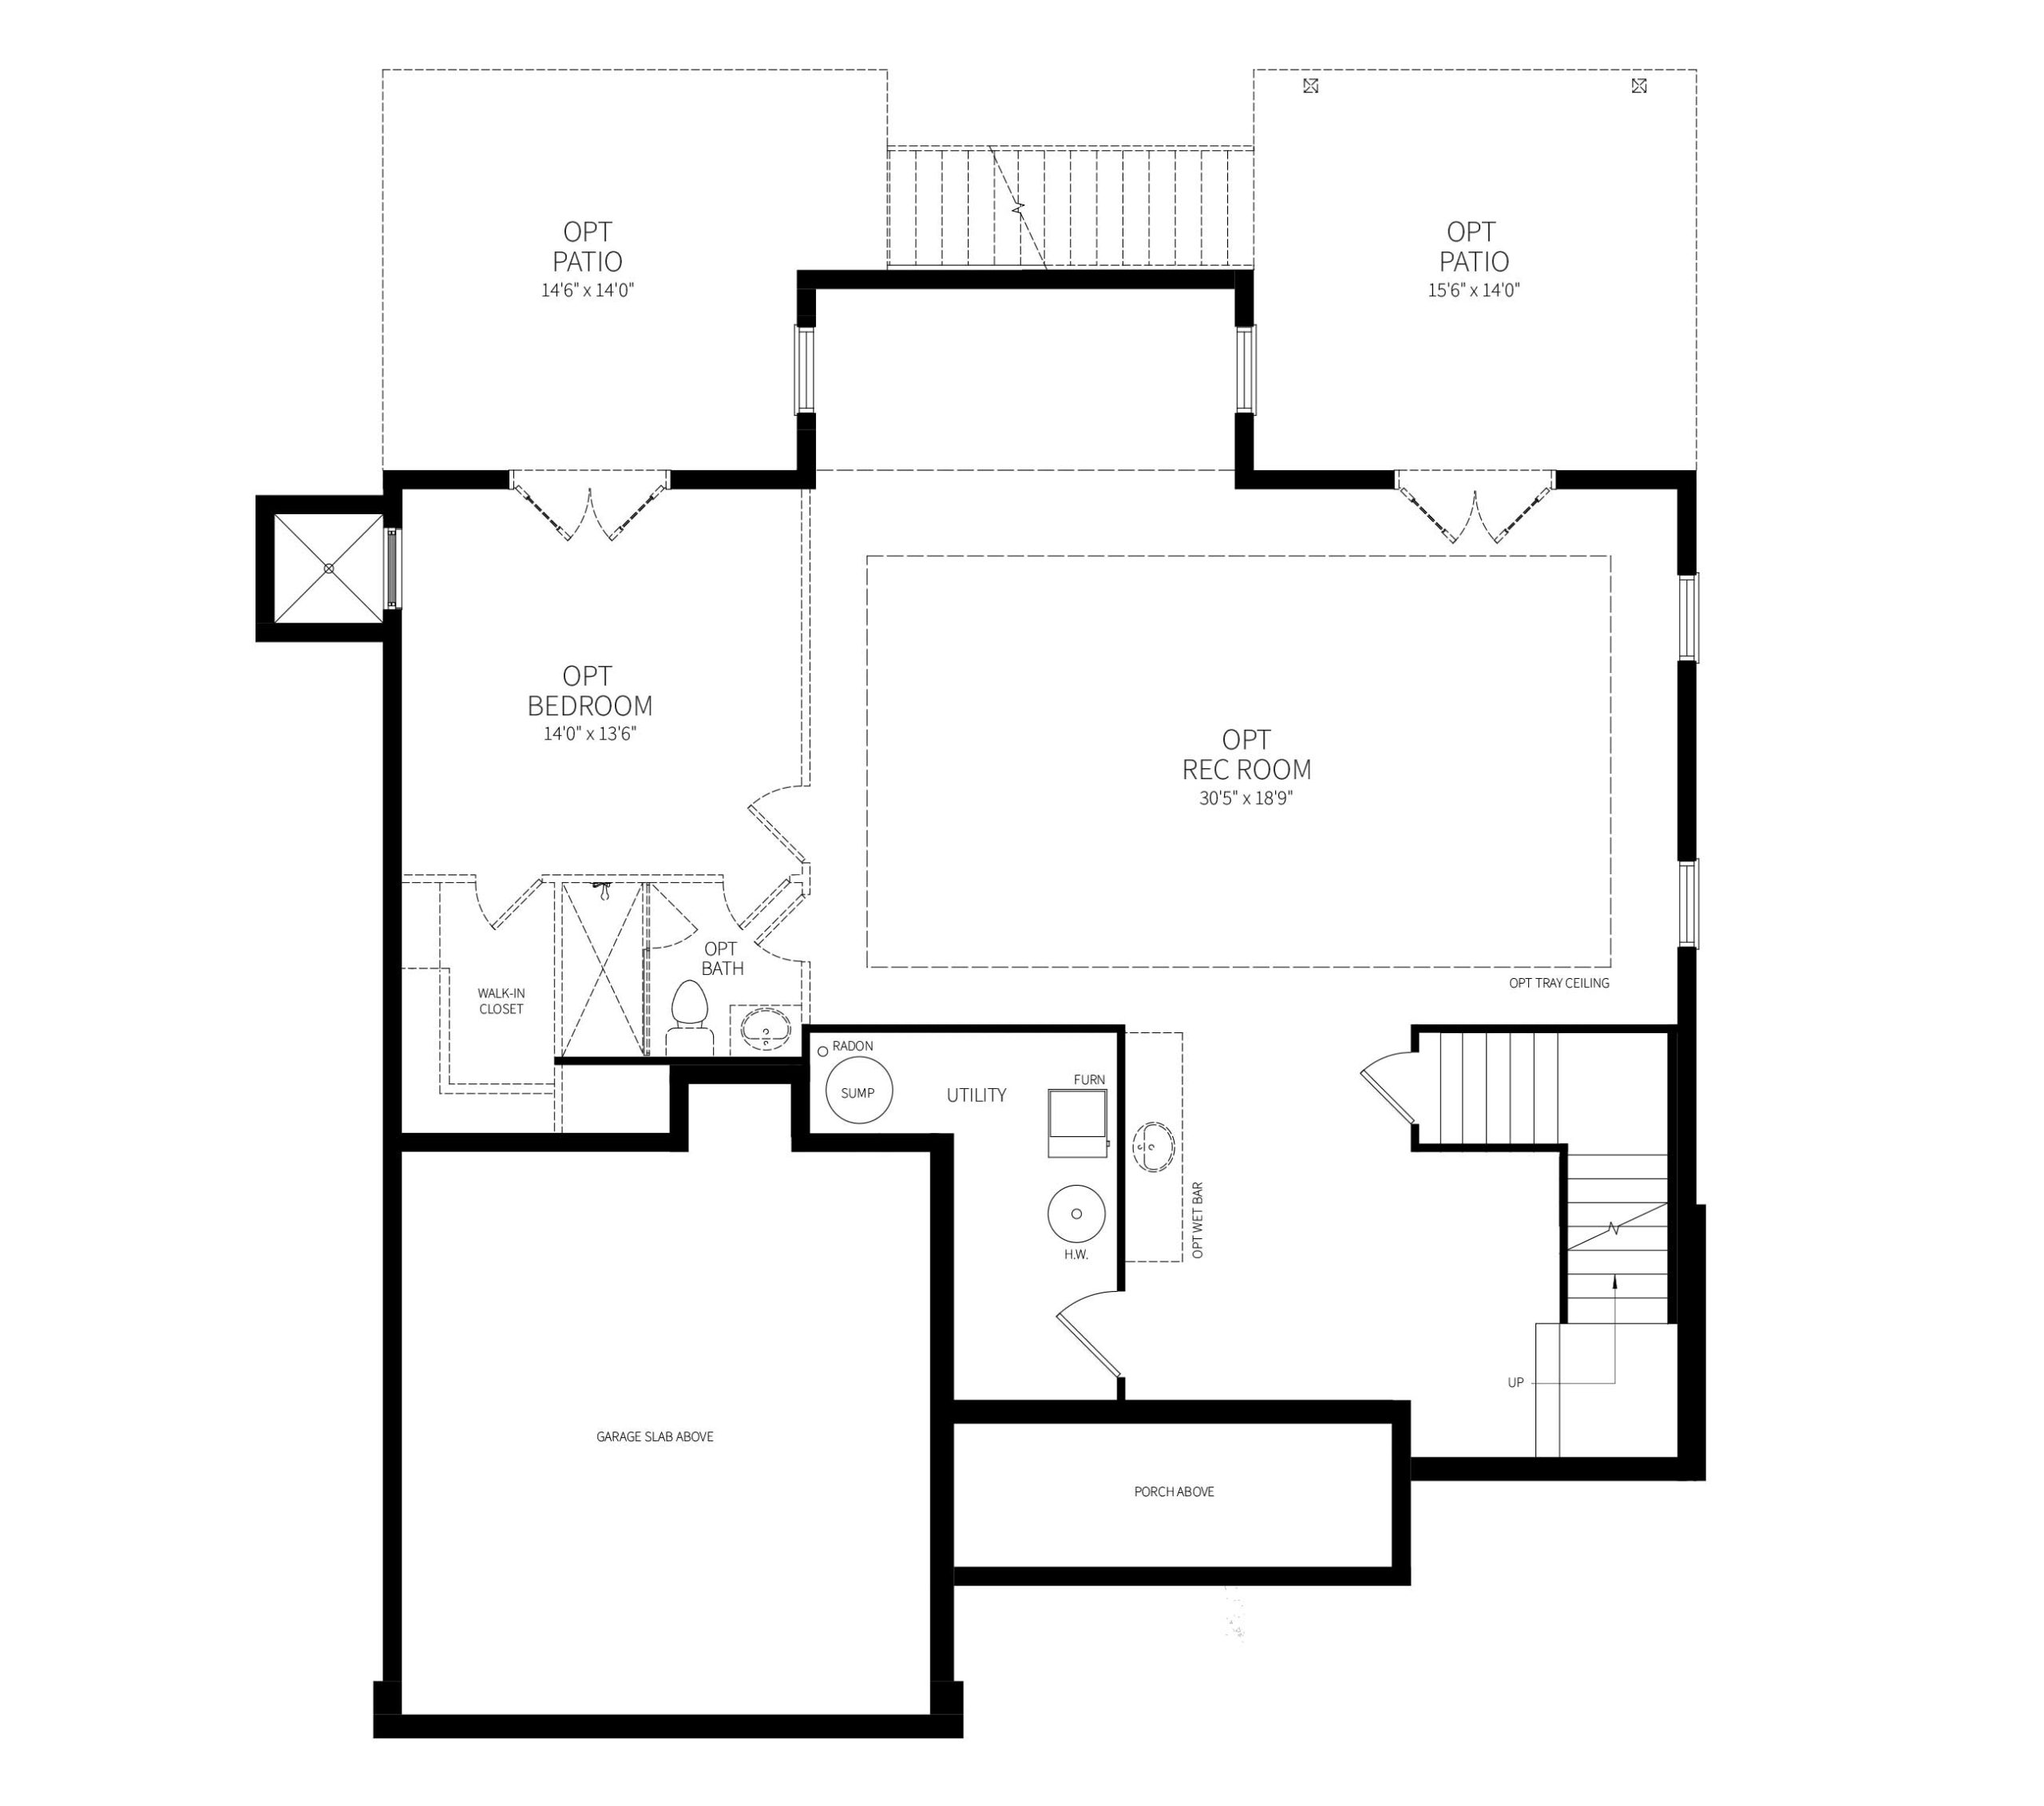 Optional basement plan for the Bradley model showing Rec Room, Bedroom with Bath and dual walk-out patios